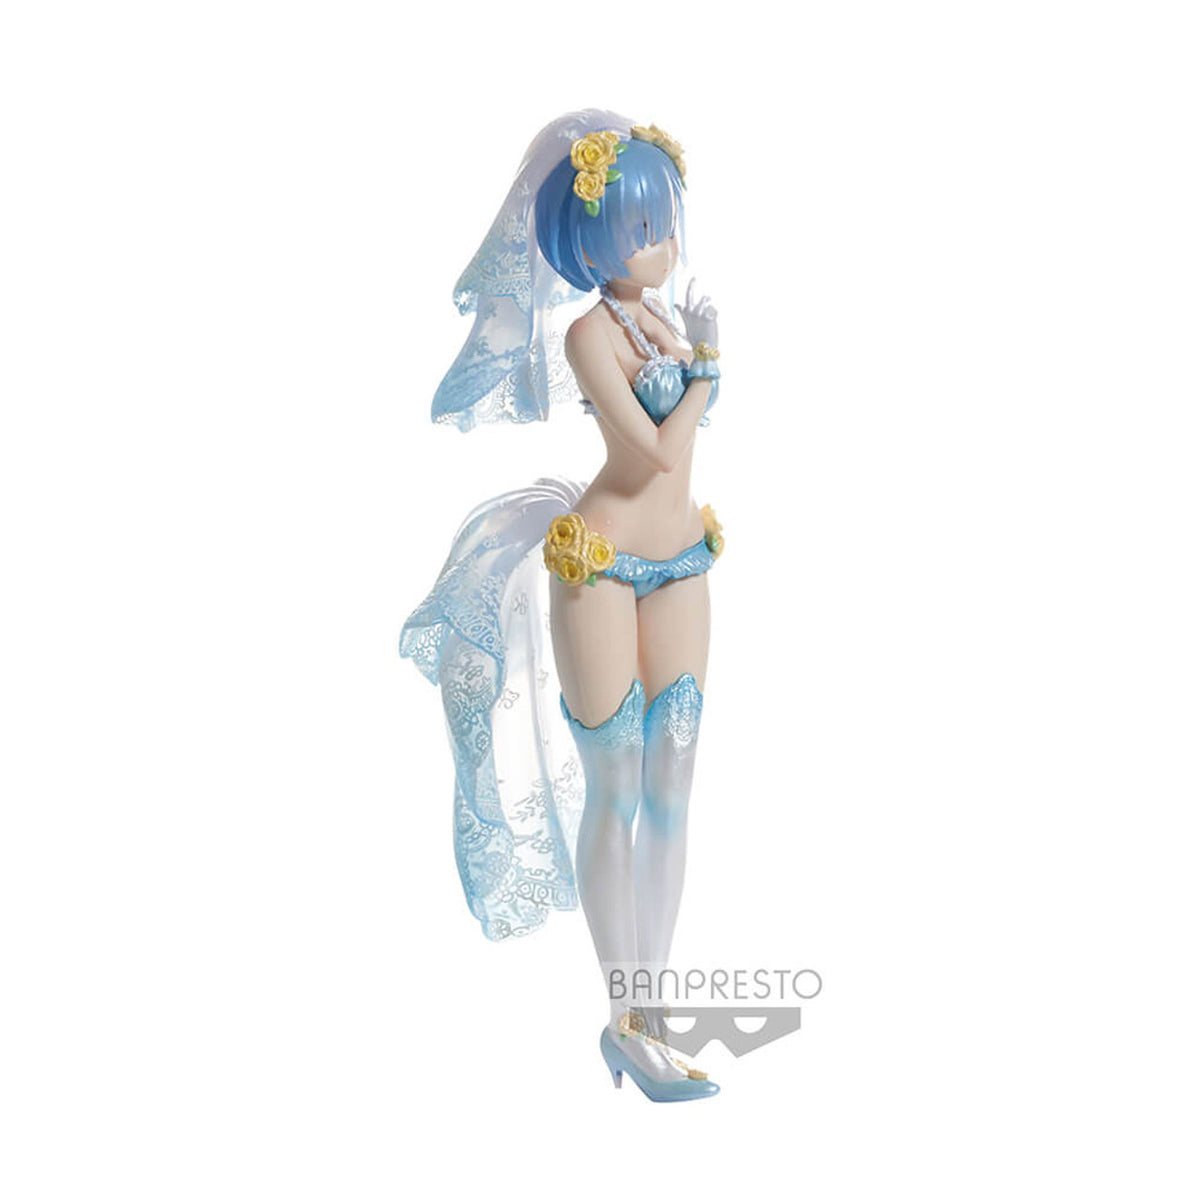 Re:Zero -Starting Life In Another World- Banpresto Chronicle Exq Figure Rem